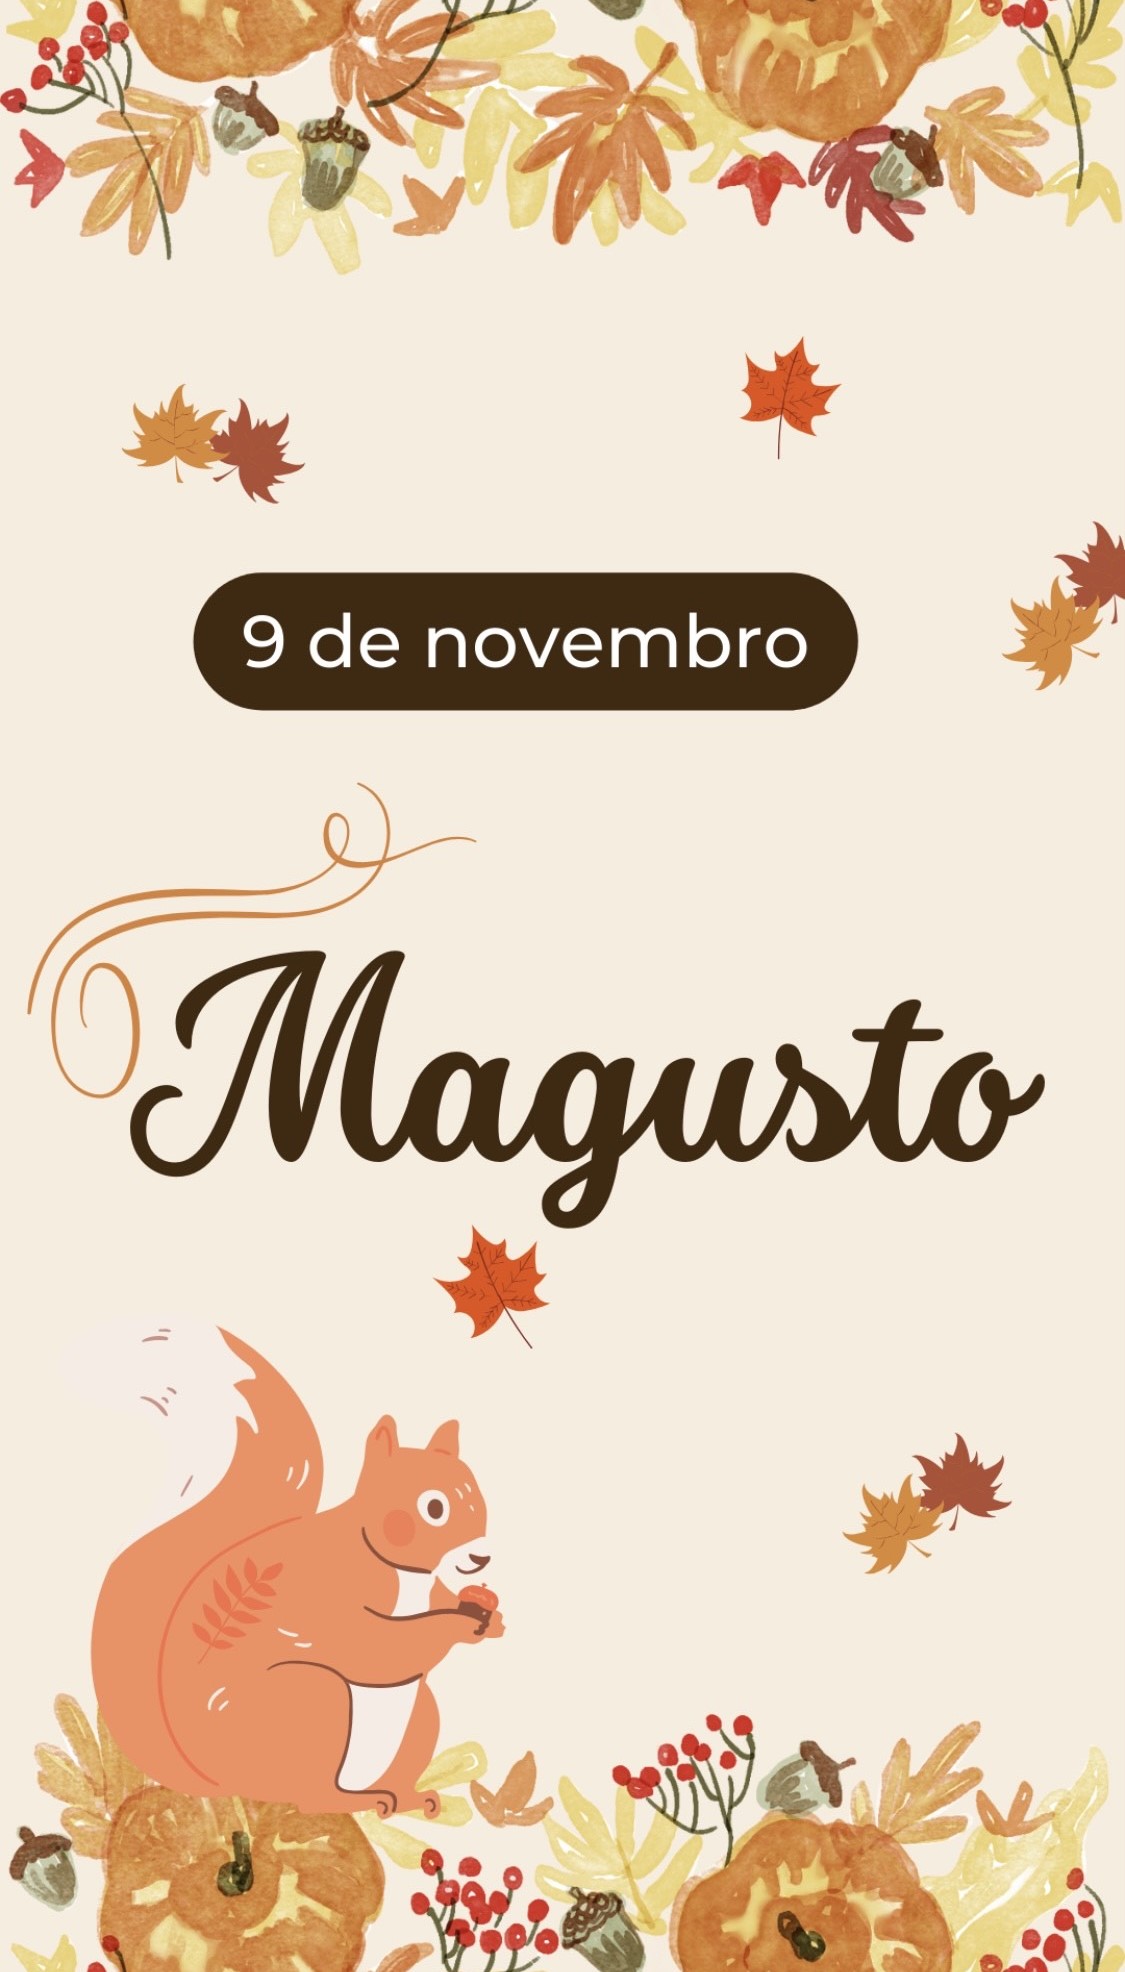 magusto 23